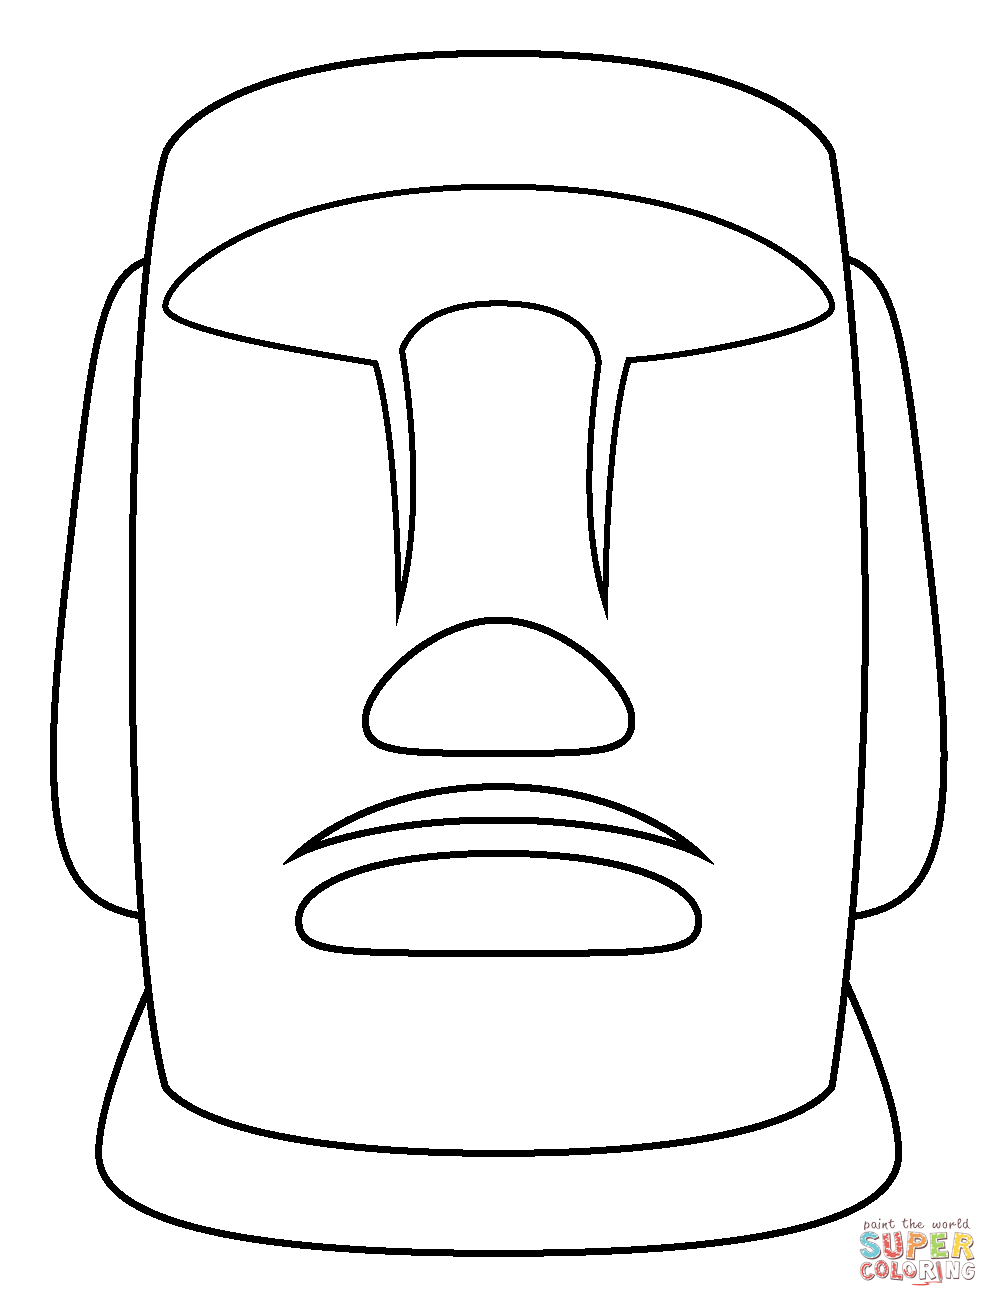 Moai emoji coloring page free printable coloring pages